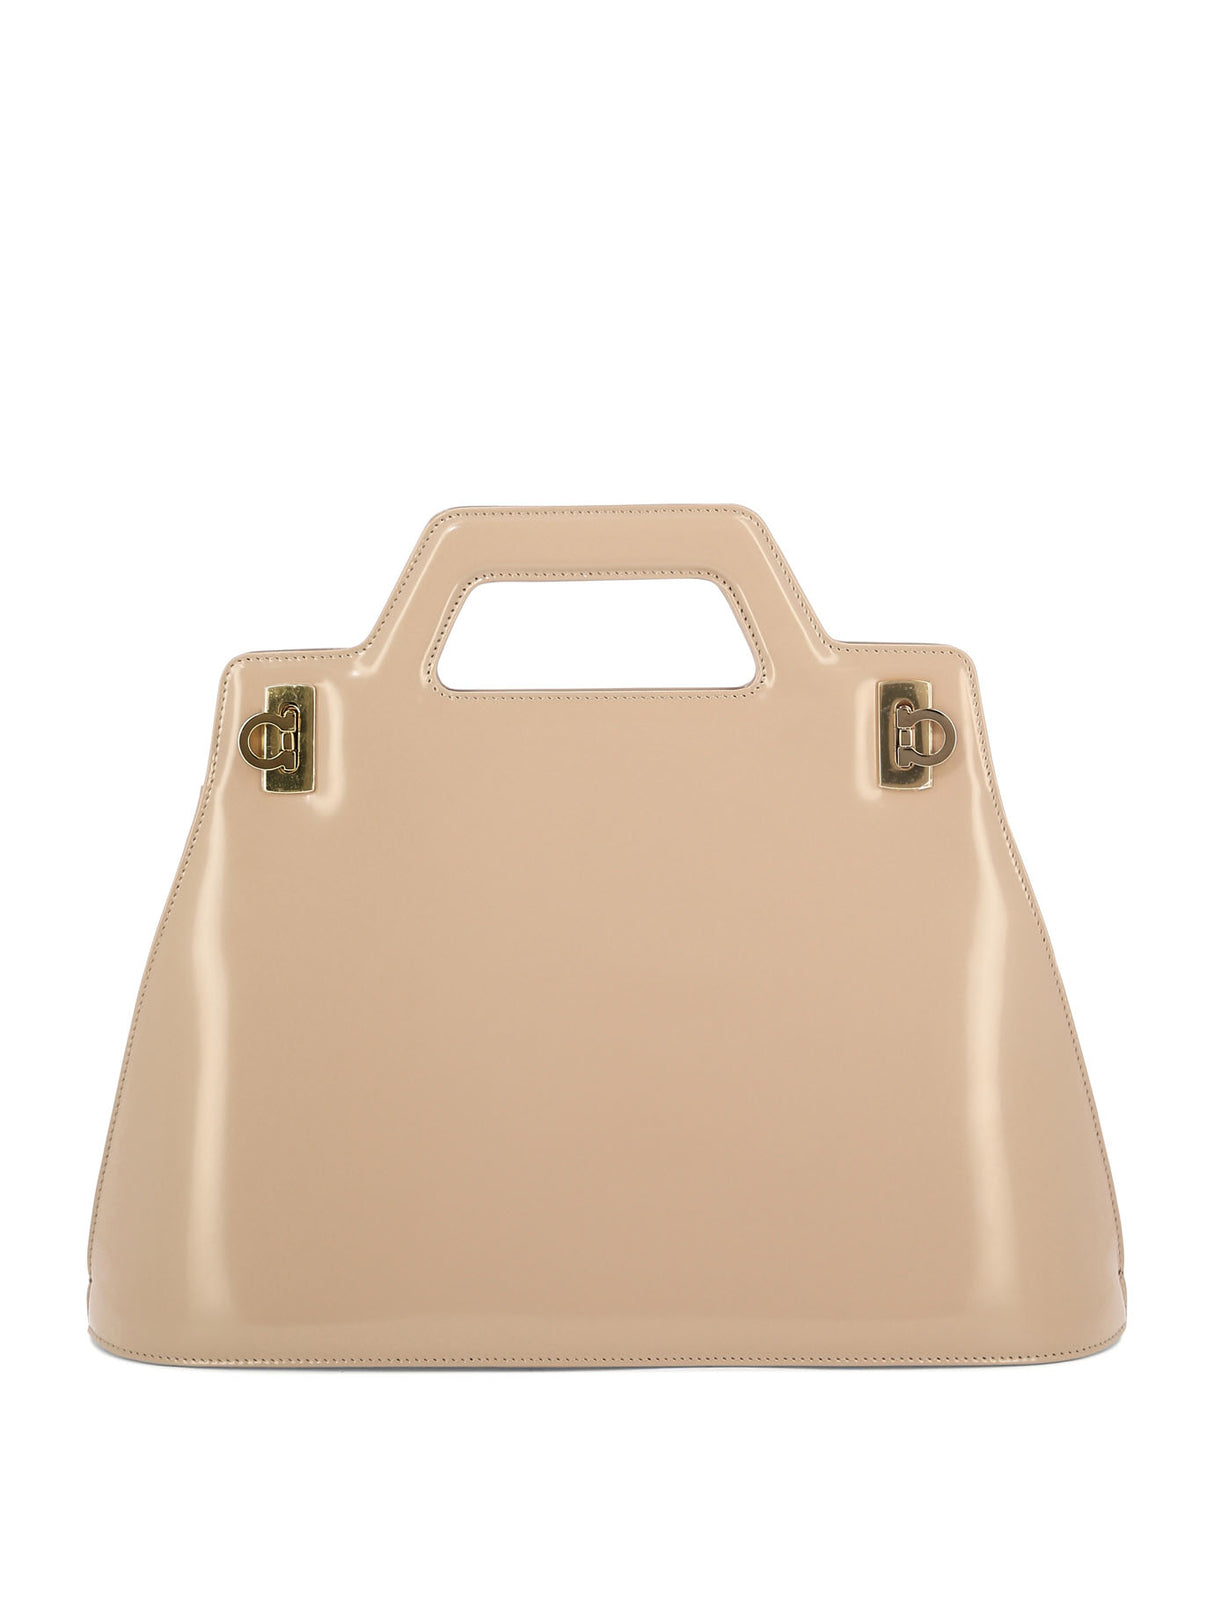 FERRAGAMO Beige Leather Tote with Removable Strap for Women - FW23 Collection